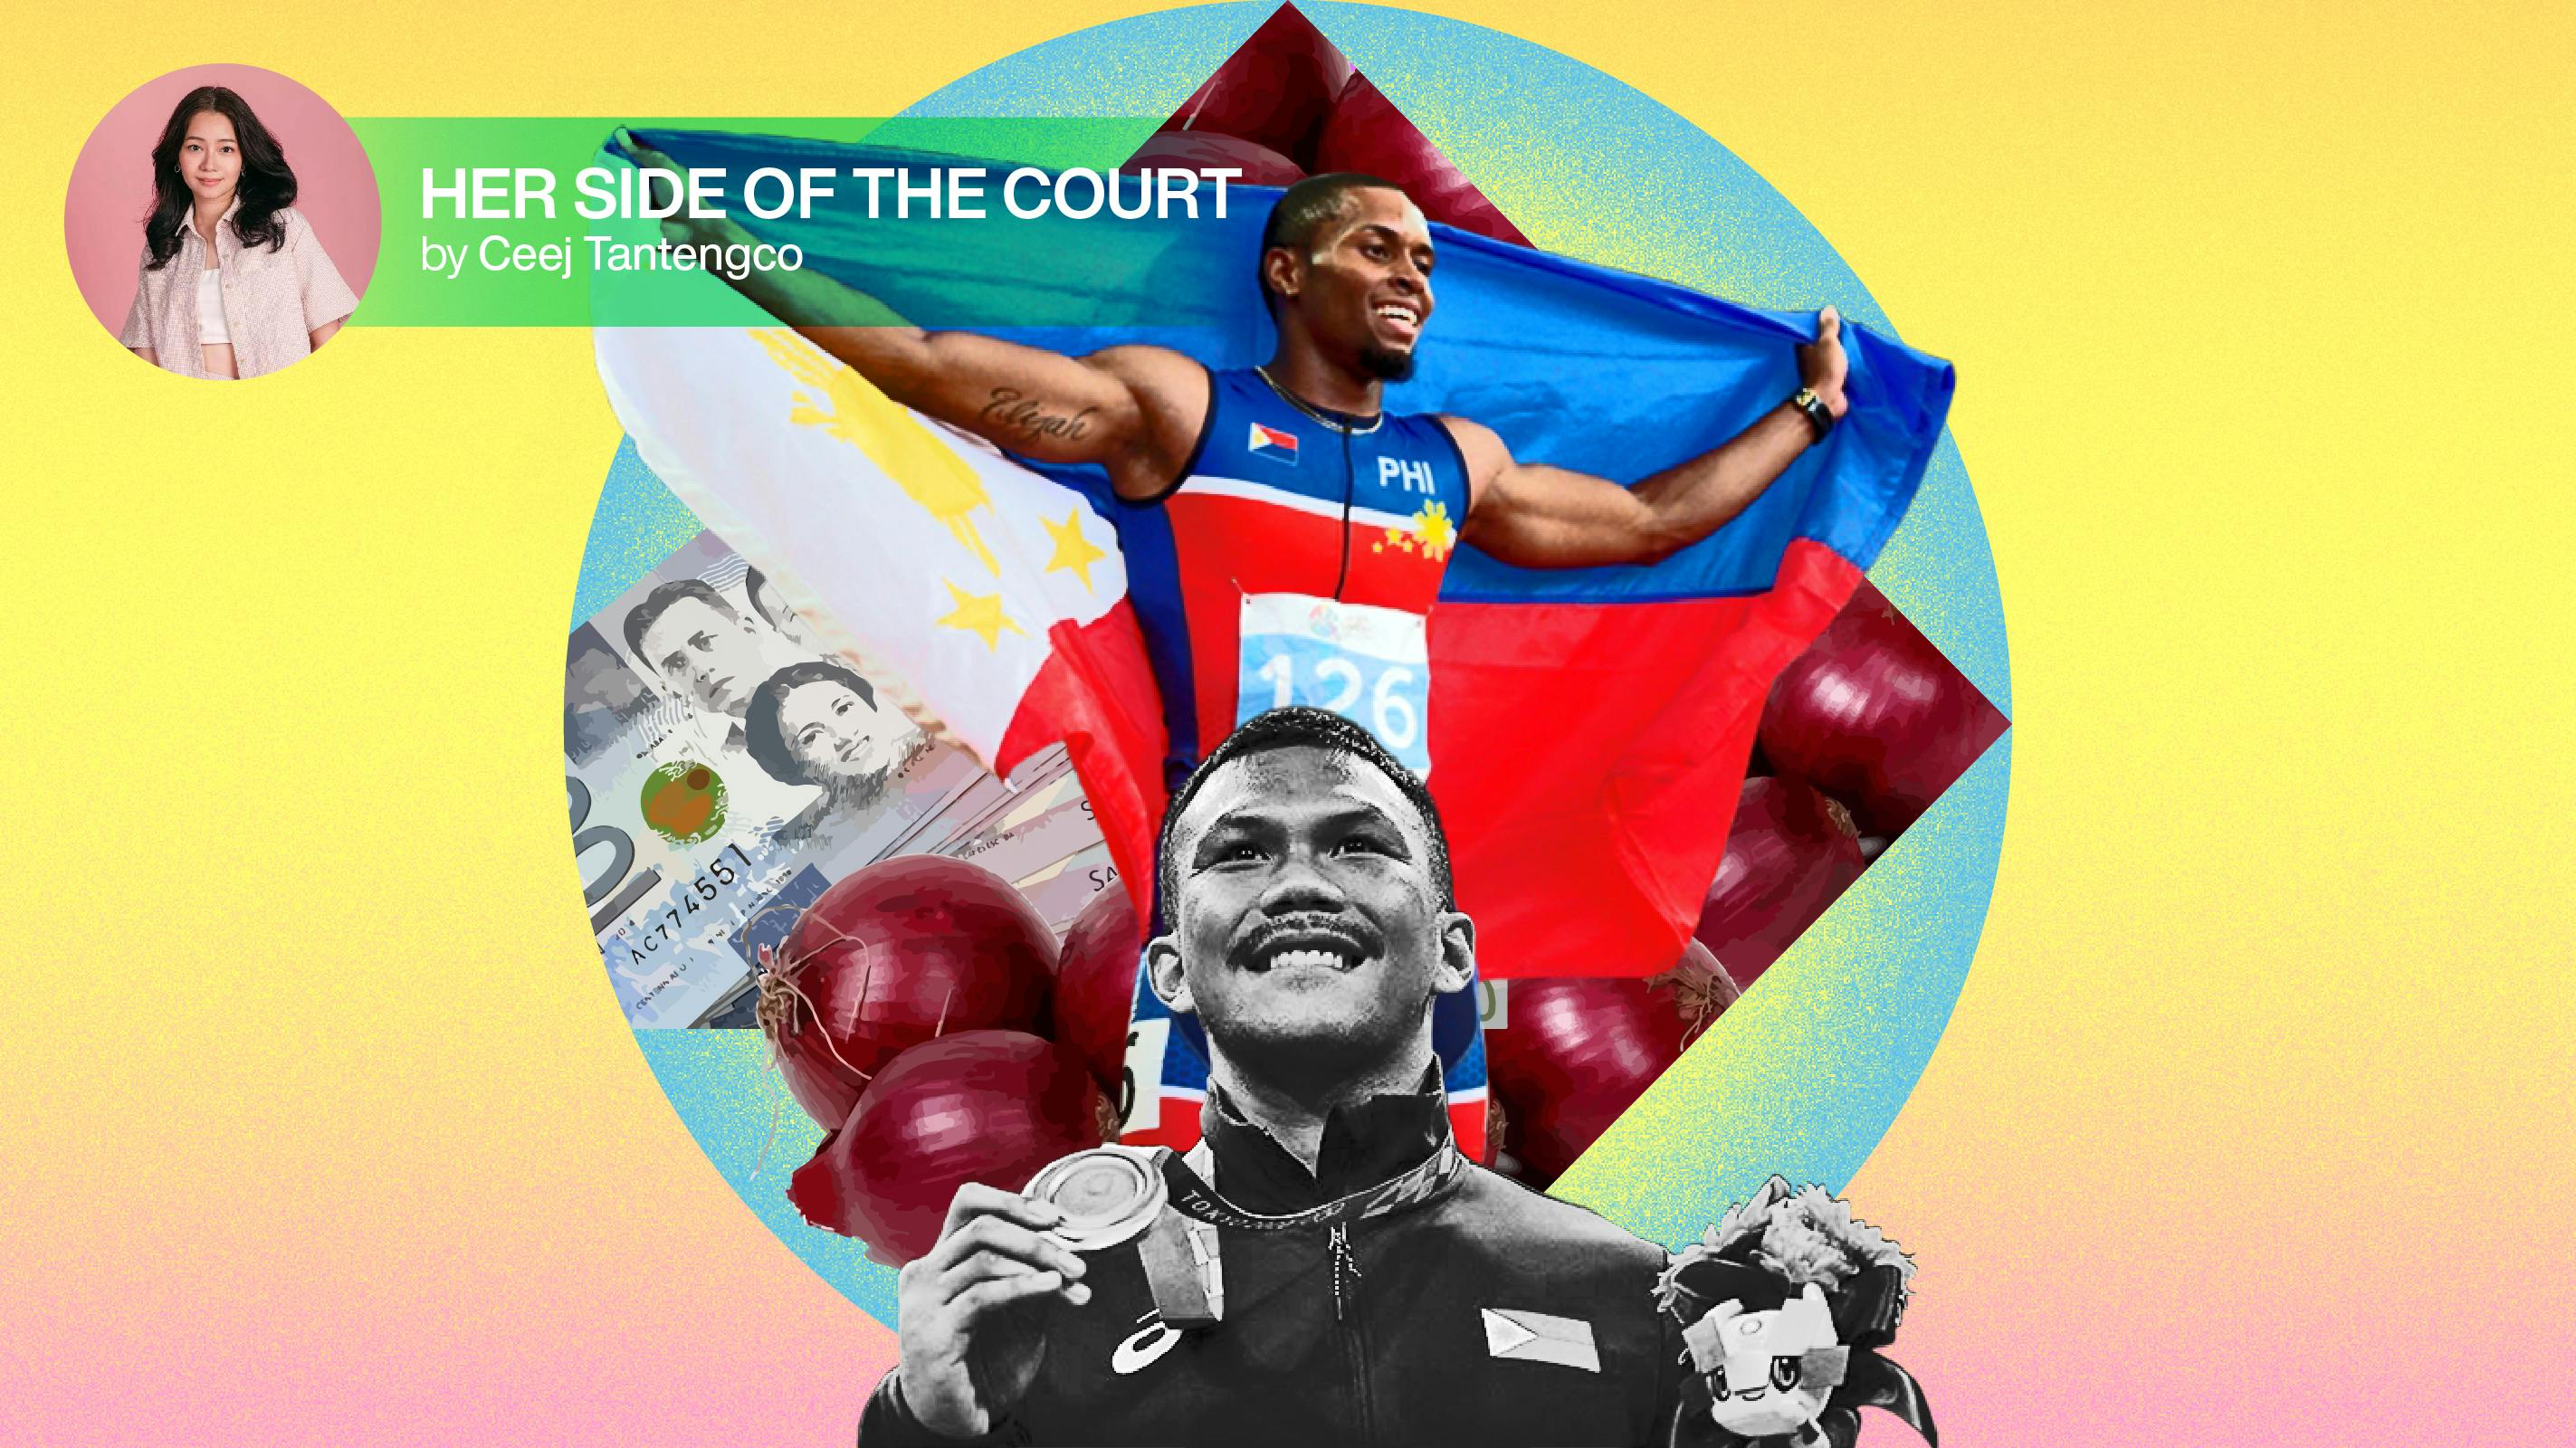 HER SIDE OF THE COURT | Hindi lang pang-sibuyas, pang-sports pa: How the economy affects sports